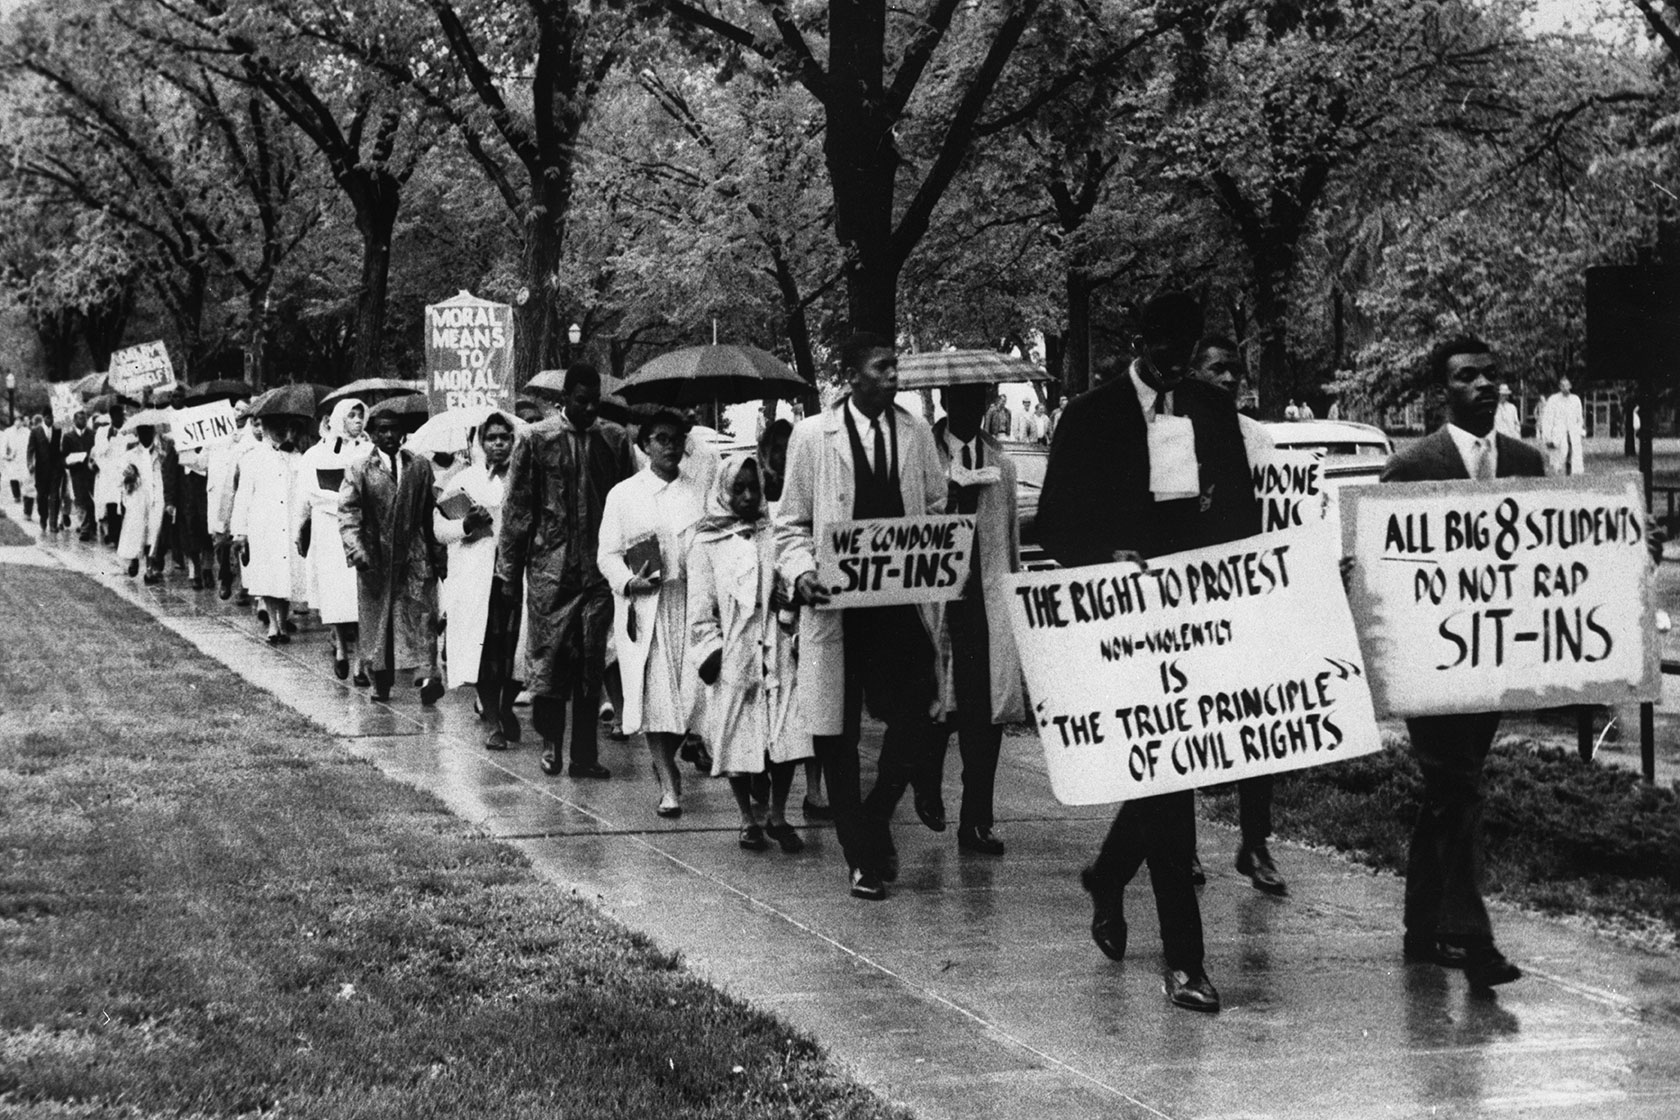 Photo shows a historical black and white image portraying a group of Black students marching through a treed section of a university campus holding signs that read 